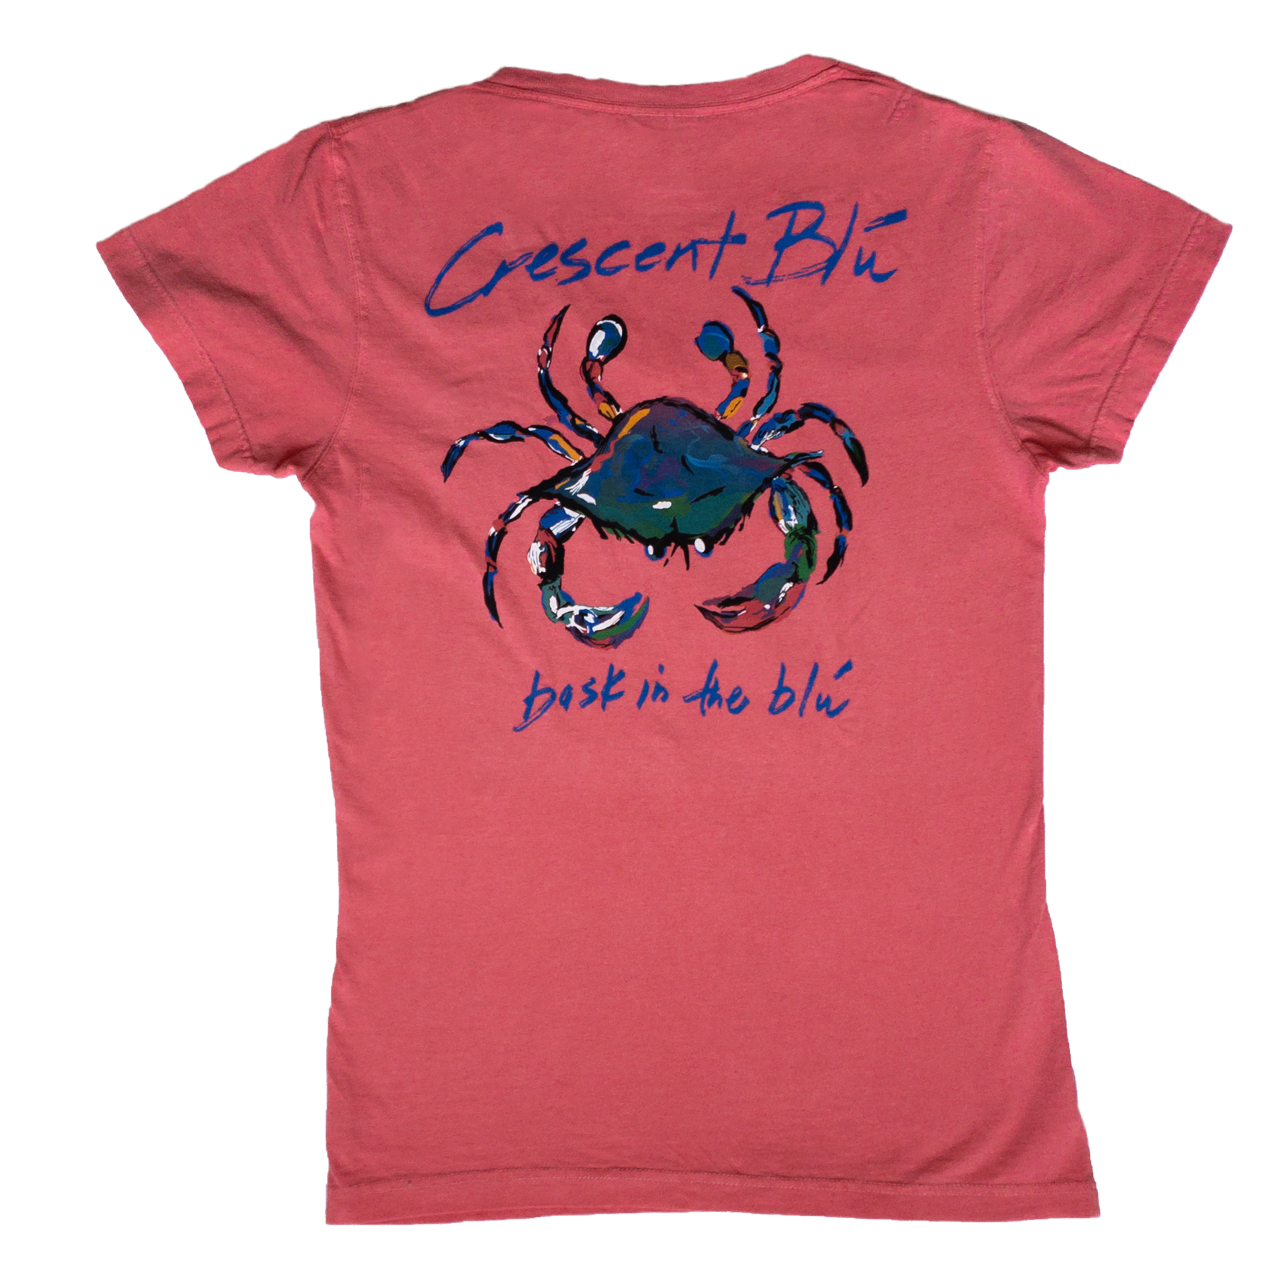 View of back of ladies cut, V-neck, Watermelon colored short sleeve T-shirt with large multi-colored Crescent Blu Signature logo printed. 